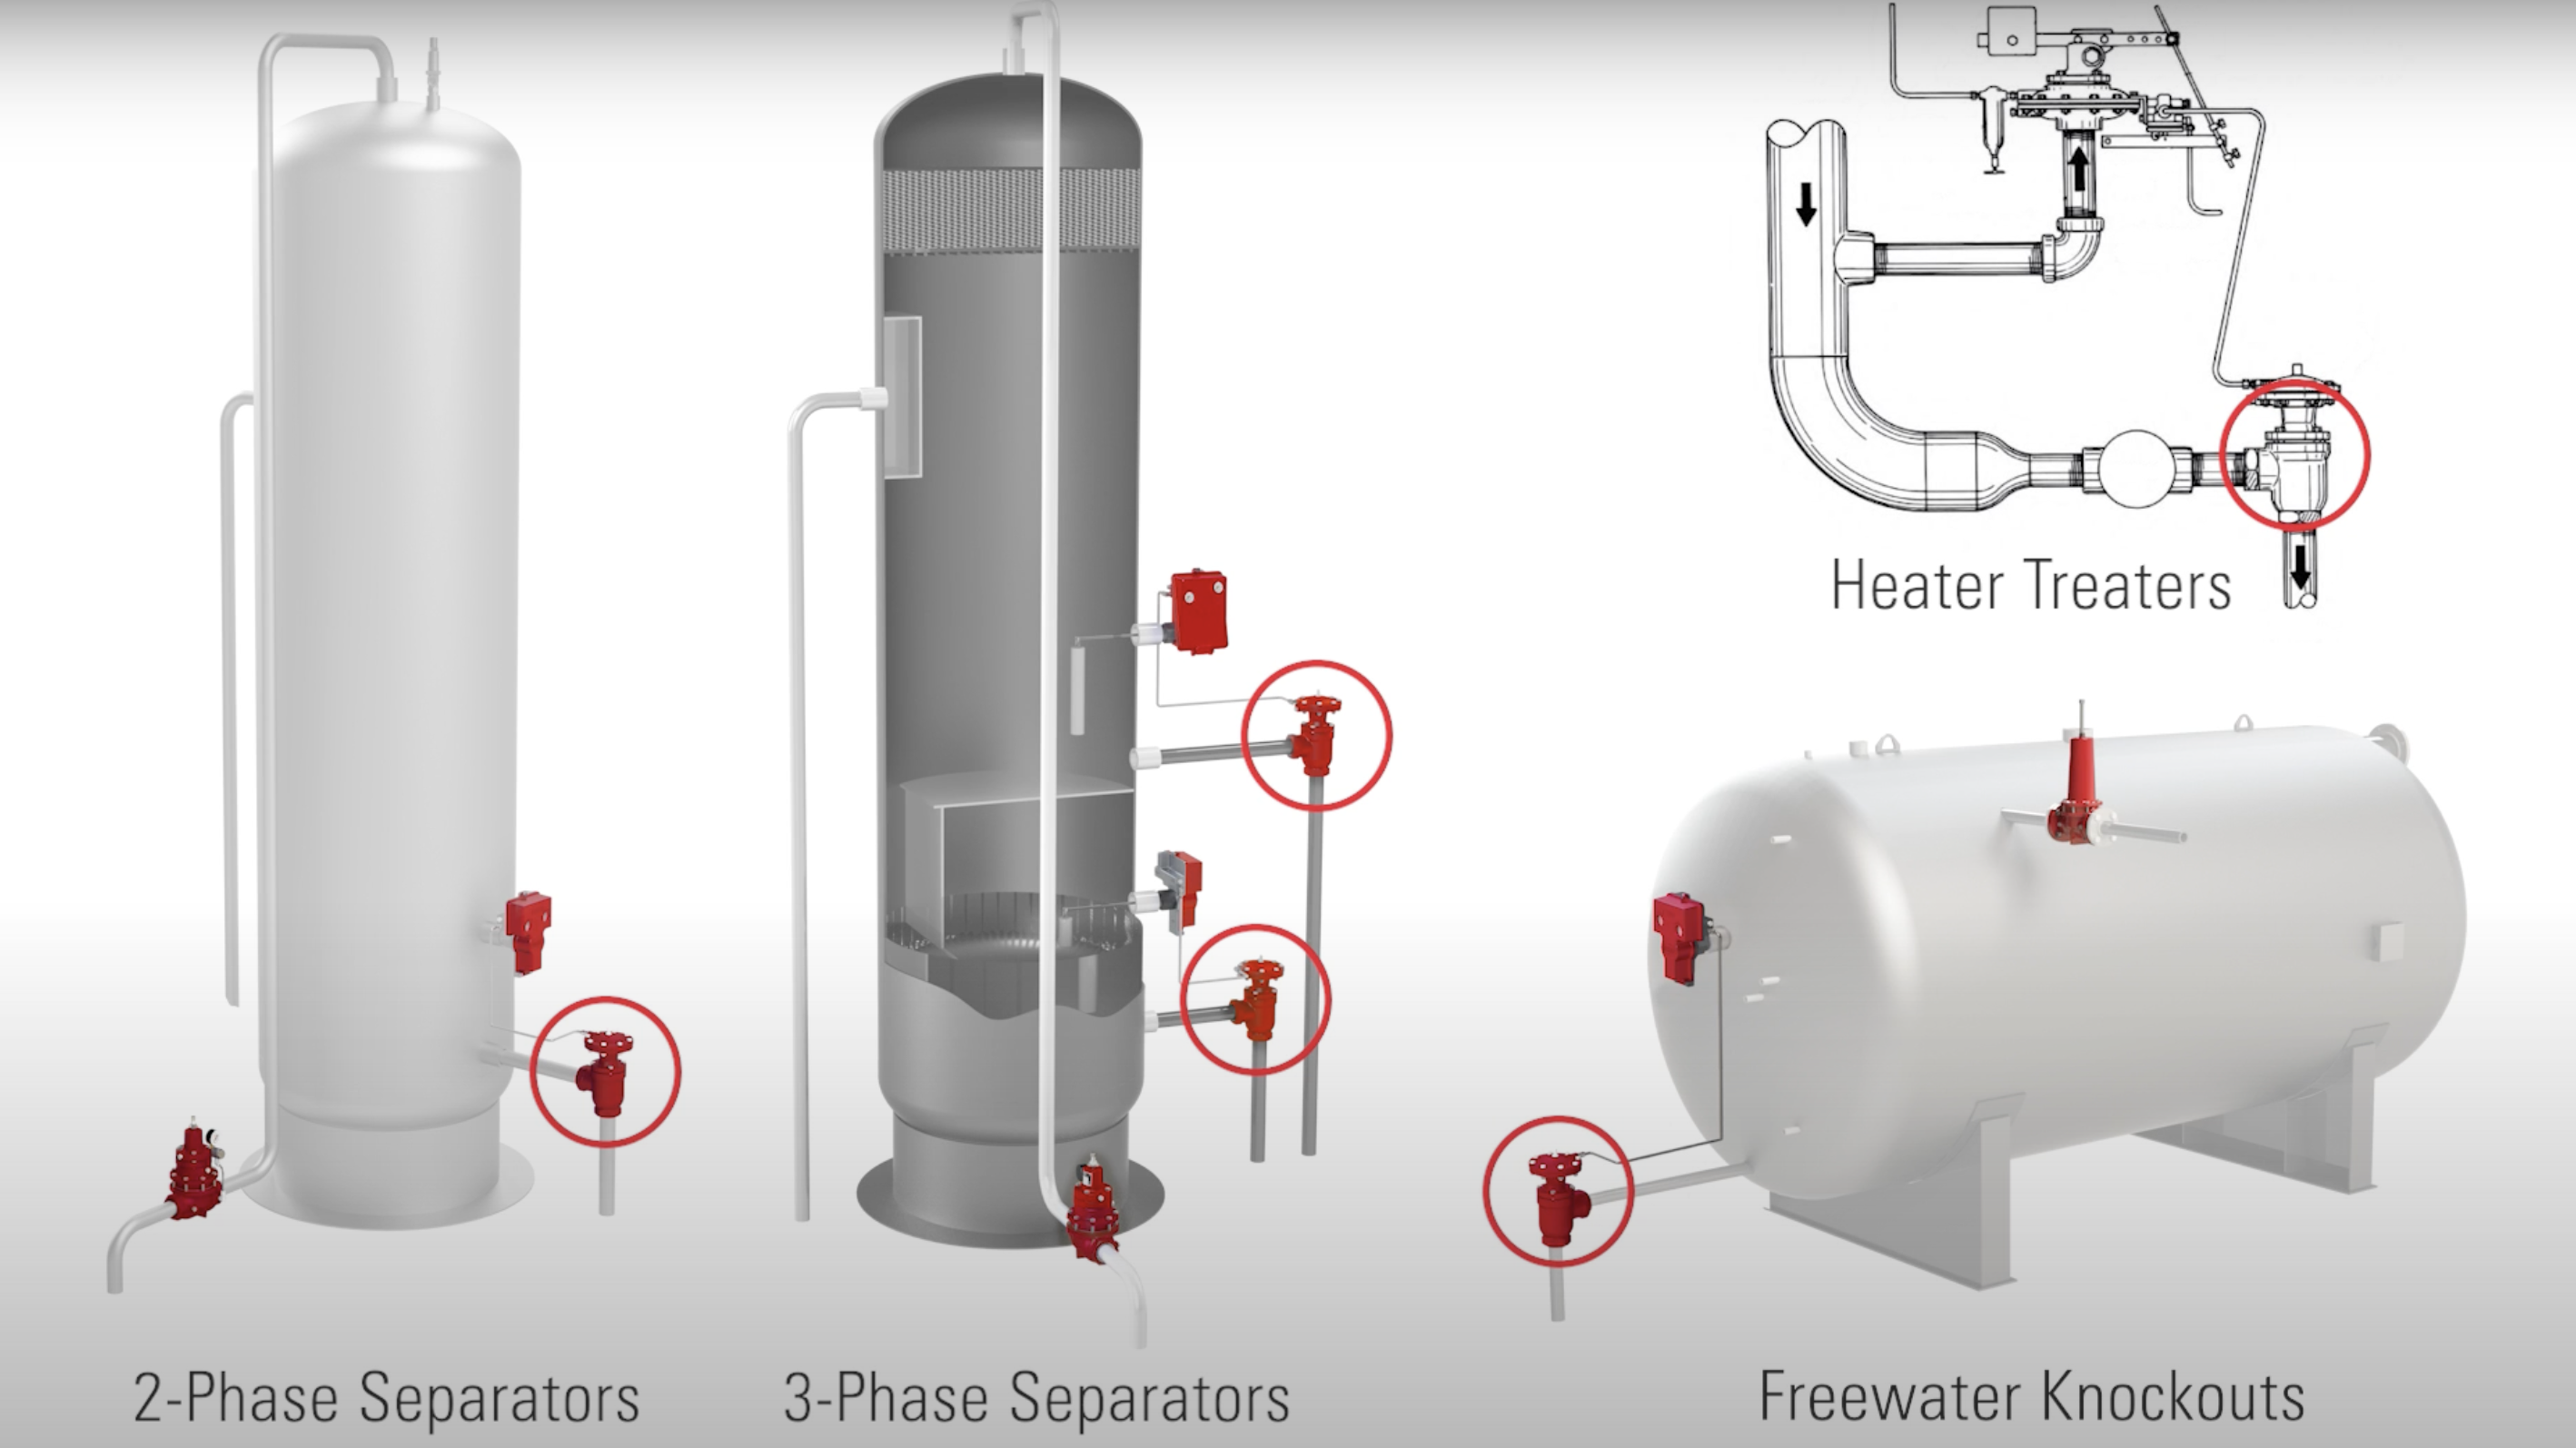 Renderings of 3-Phase and 3-Phase Separators, Heater Treaters, and Freewater Knockouts